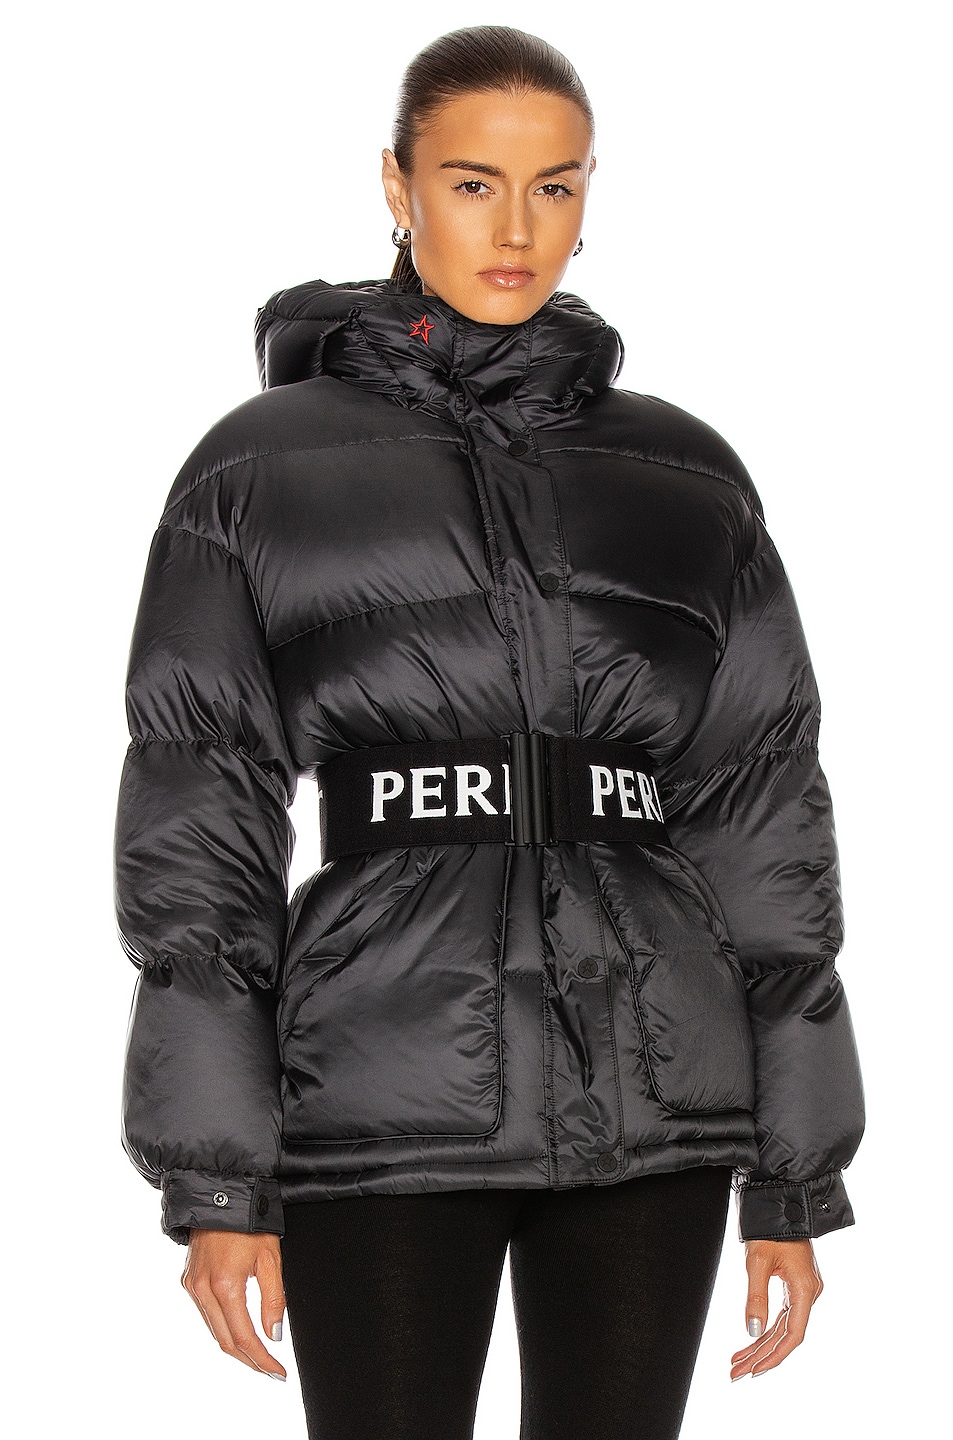 Image 1 of Perfect Moment Oversize Parka II Jacket in Black & Snow White